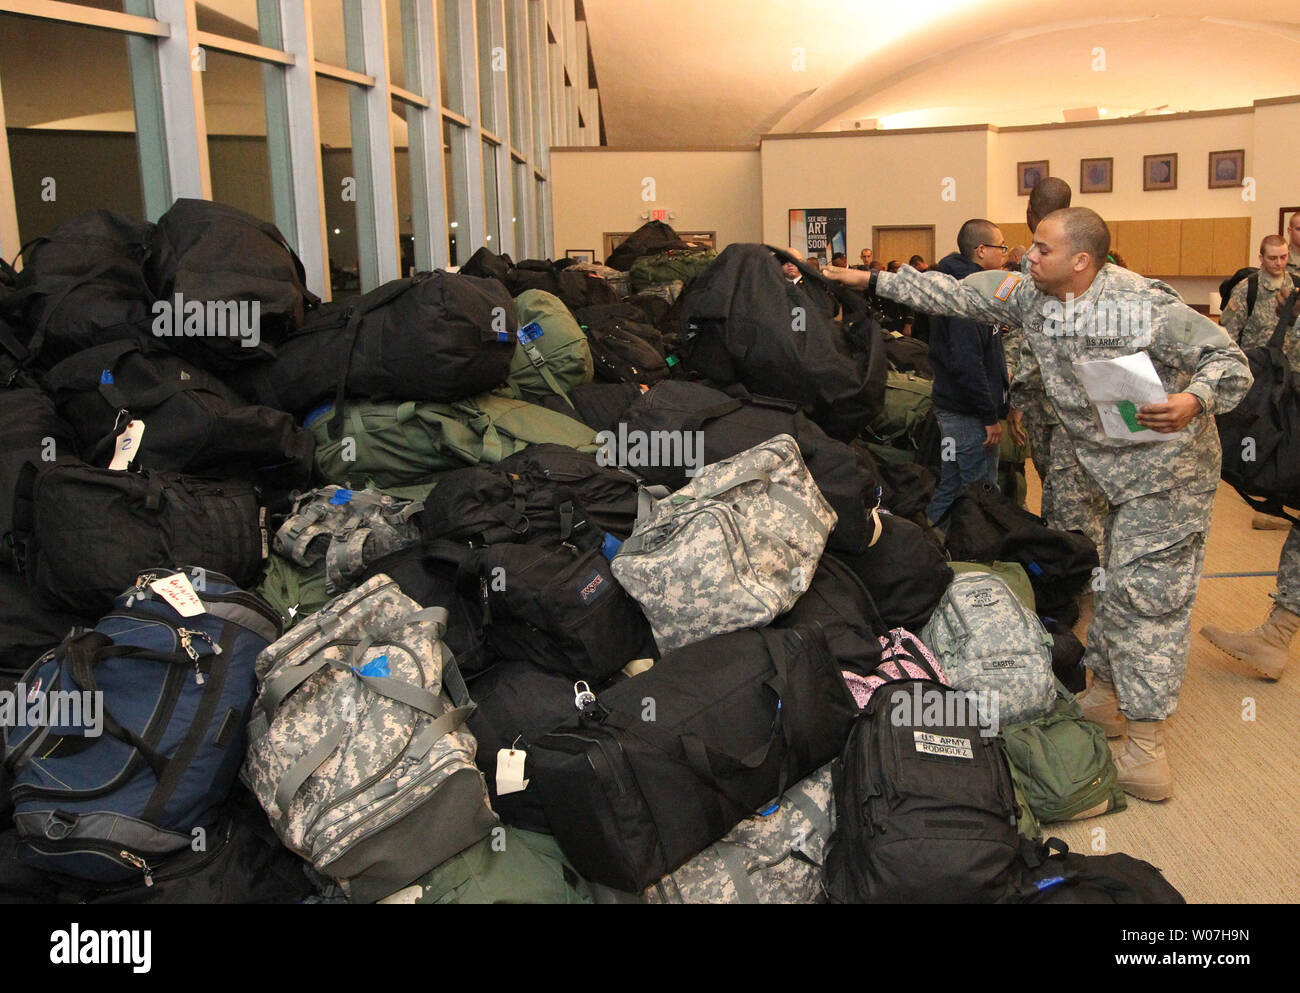 A soldier retrieves his bag from a pile during Holiday Block leave at Lambert-St. Louis International Airport on December 20, 2014. Nearly 5500 soldiers from Fort Leonard Wood converge on the airport at once at they go home for the holidays.   UPI/Bill Greenblatt Stock Photo